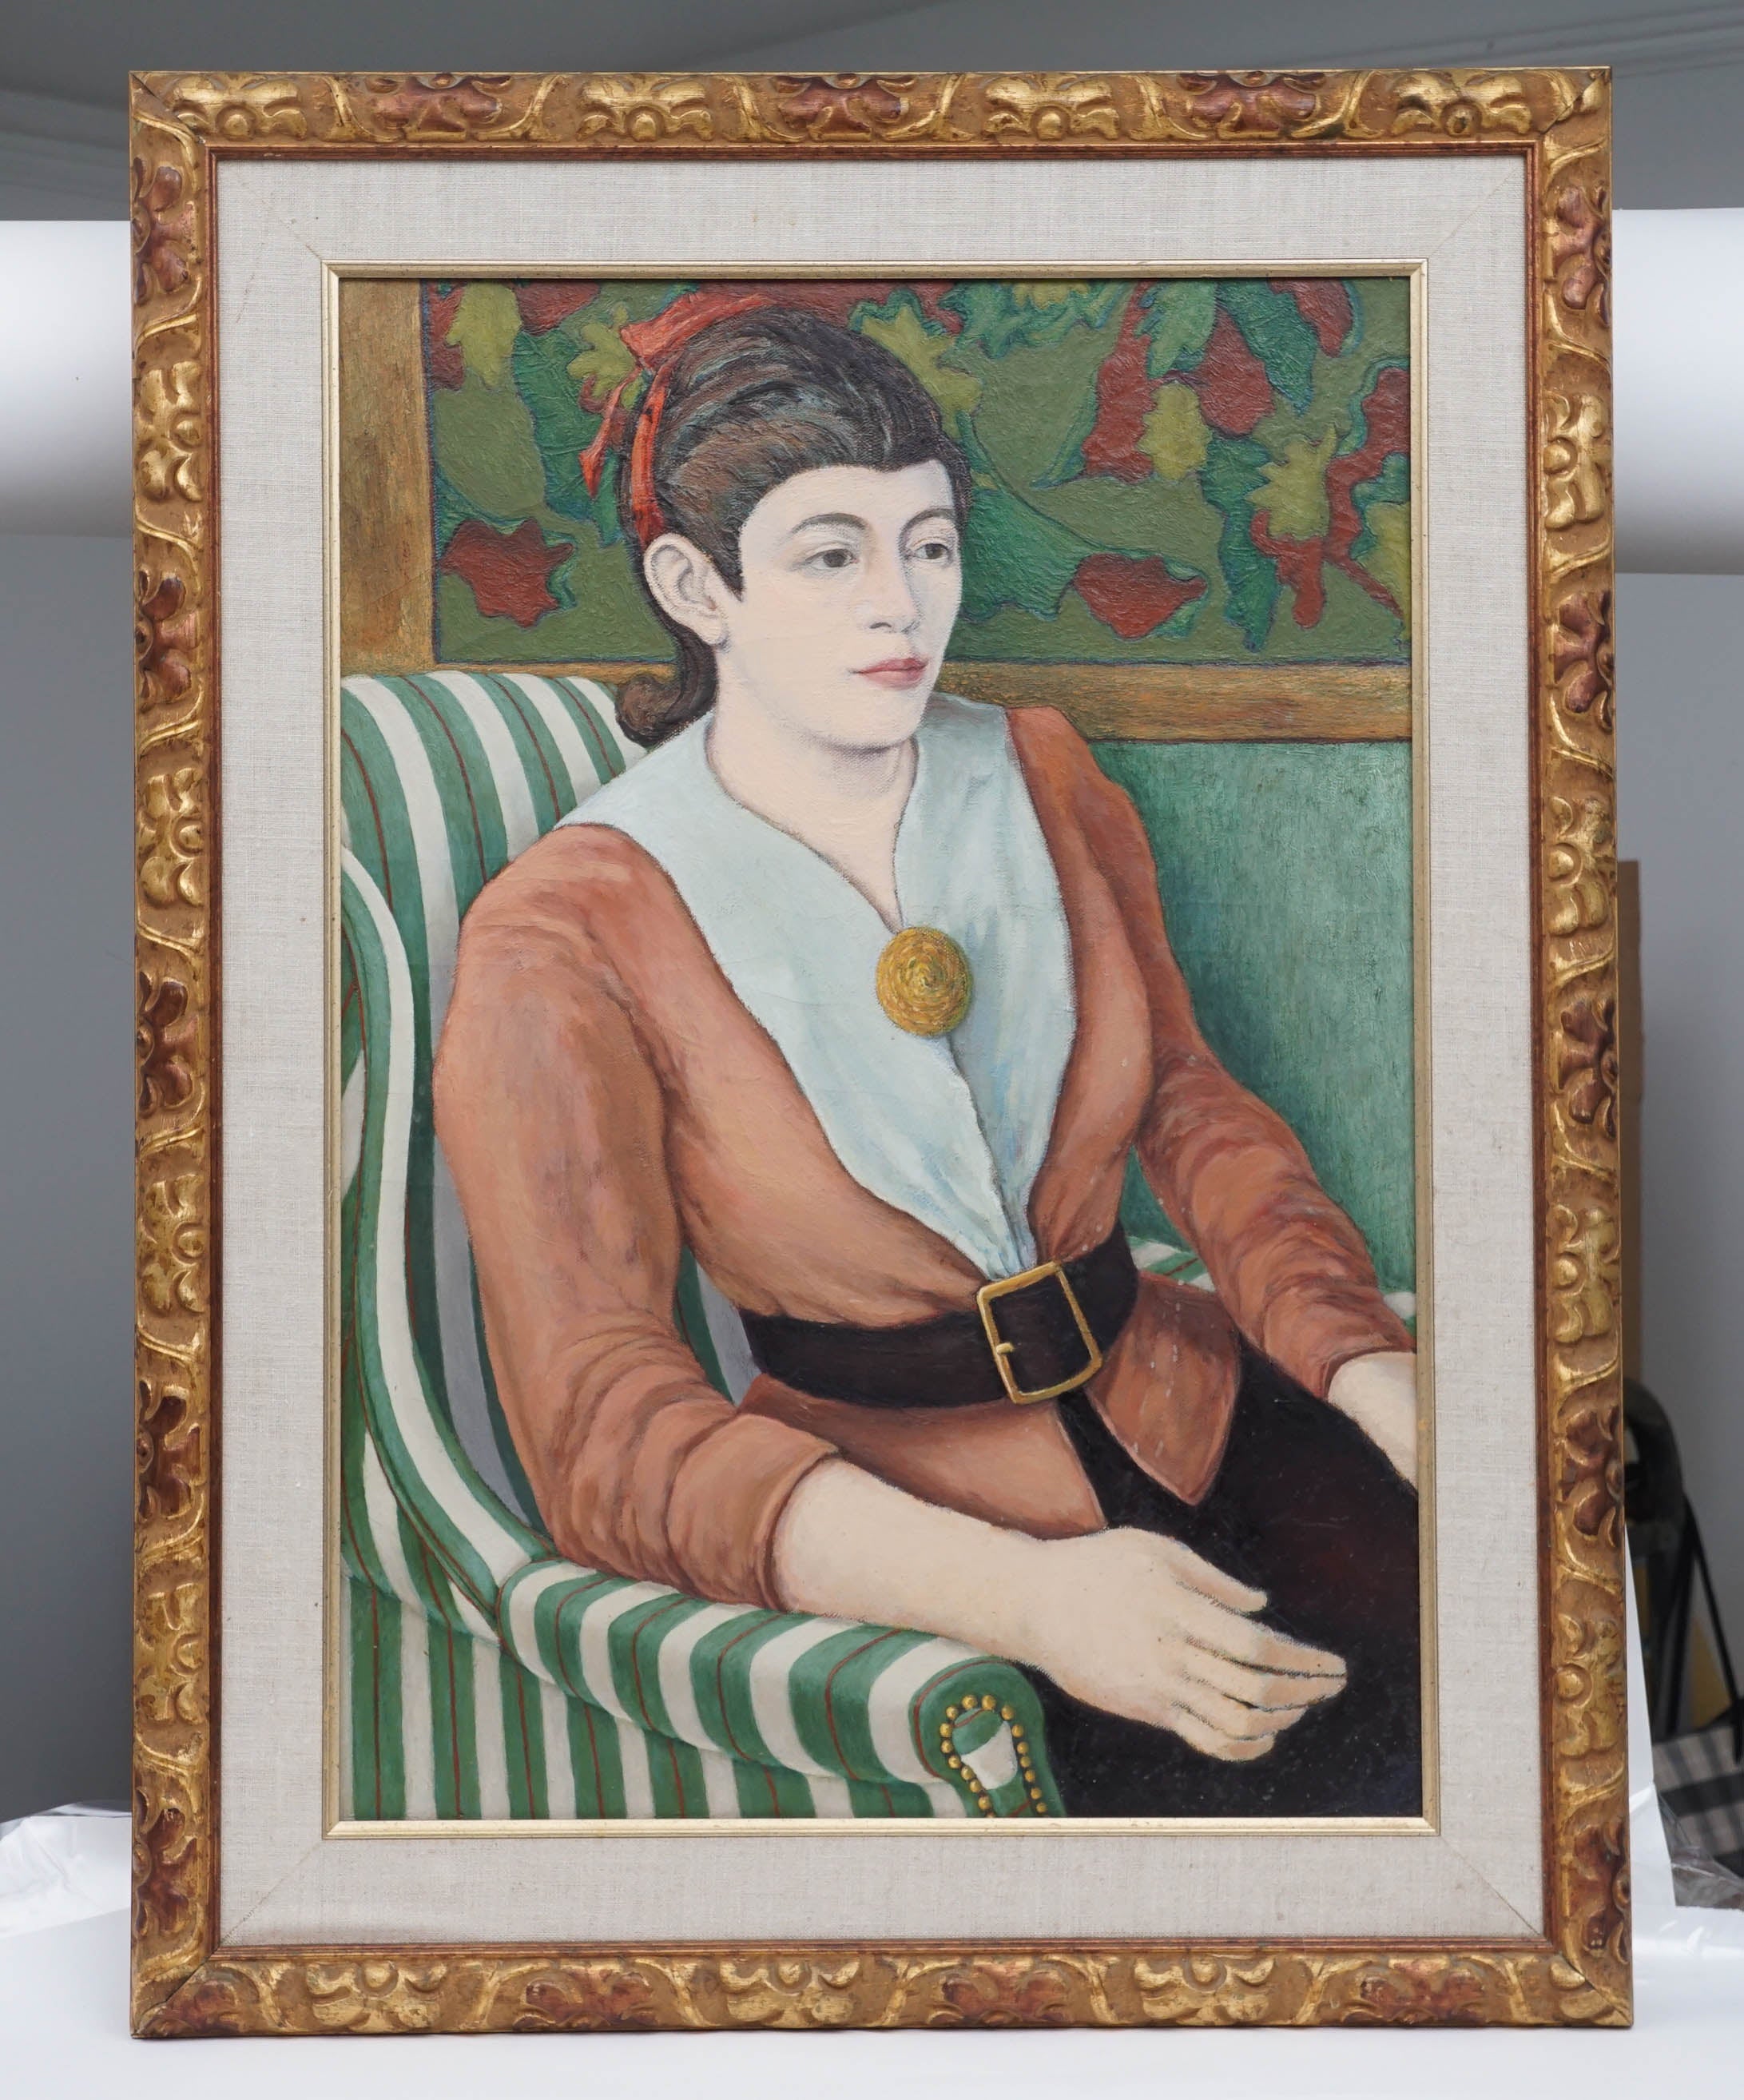 Wonderful depiction of a woman by a wall known female Scottish artist. Winifred and her sister Allison were well known for their woodcuts and oil paintings. Winifred continued to paint until her 90th birthday. She and her sister were the subjects of